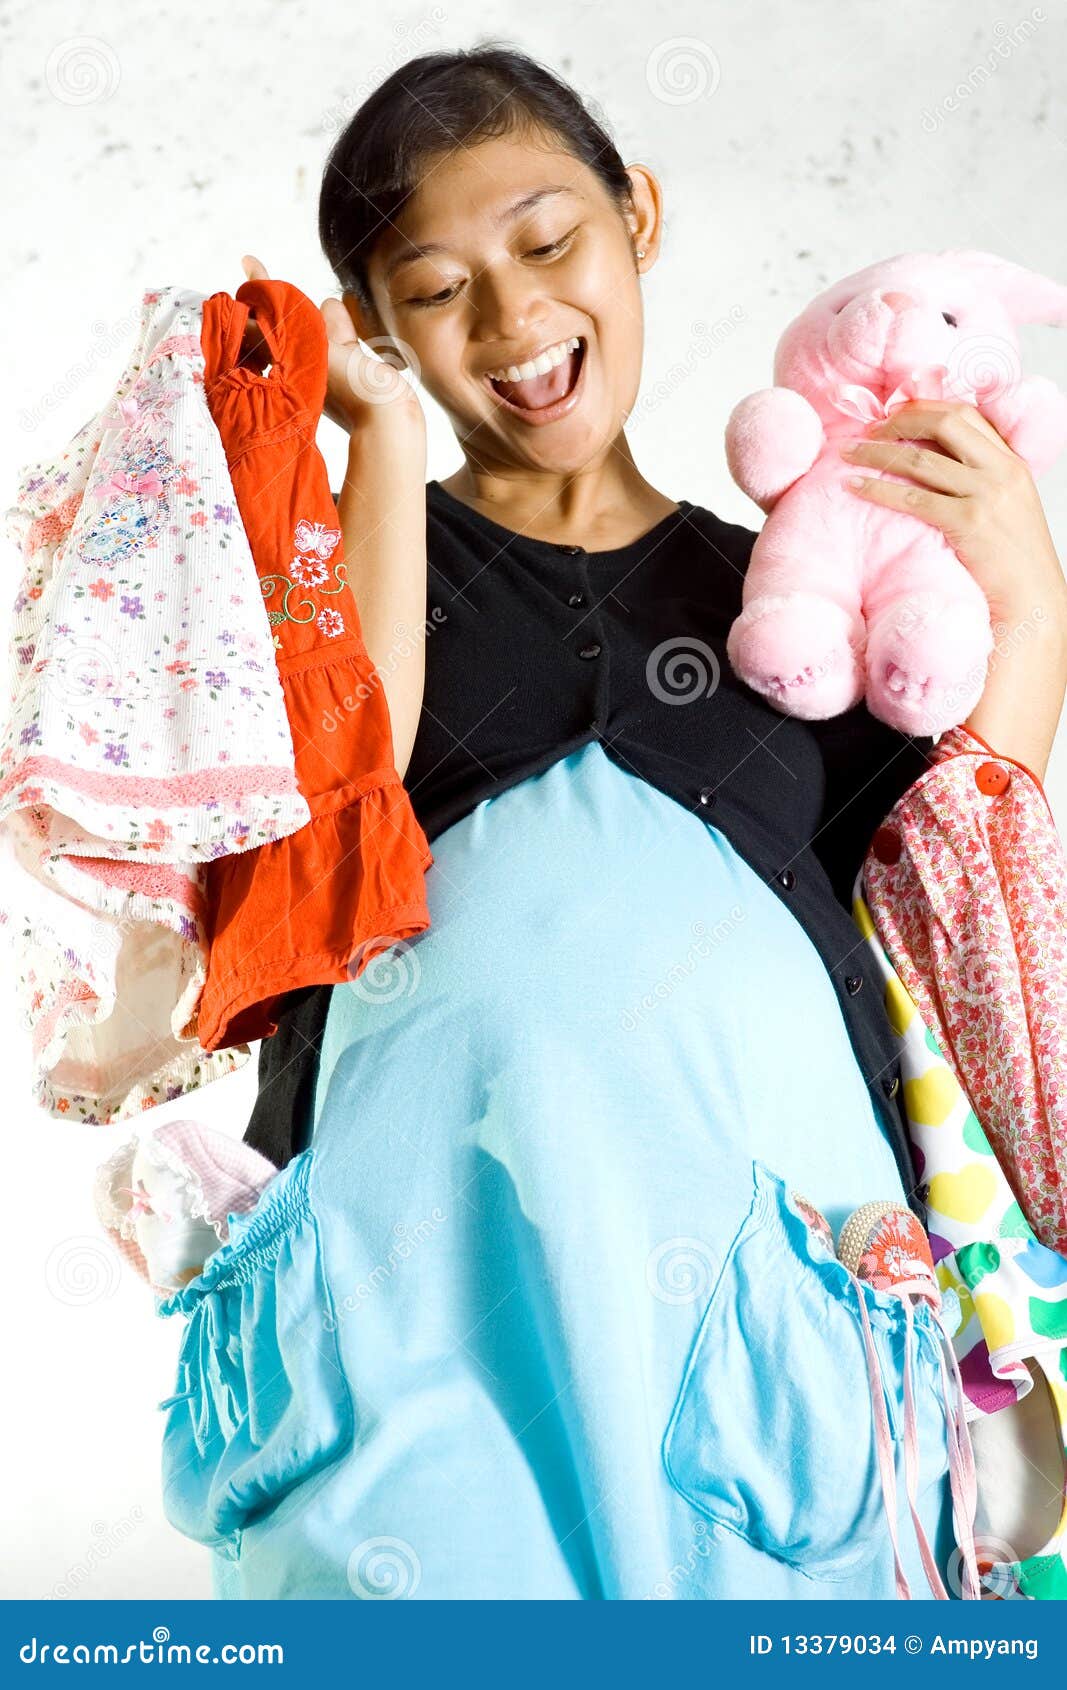 Pregnancy And Baby Clothing Shopping Stock Images - Image: 13379034